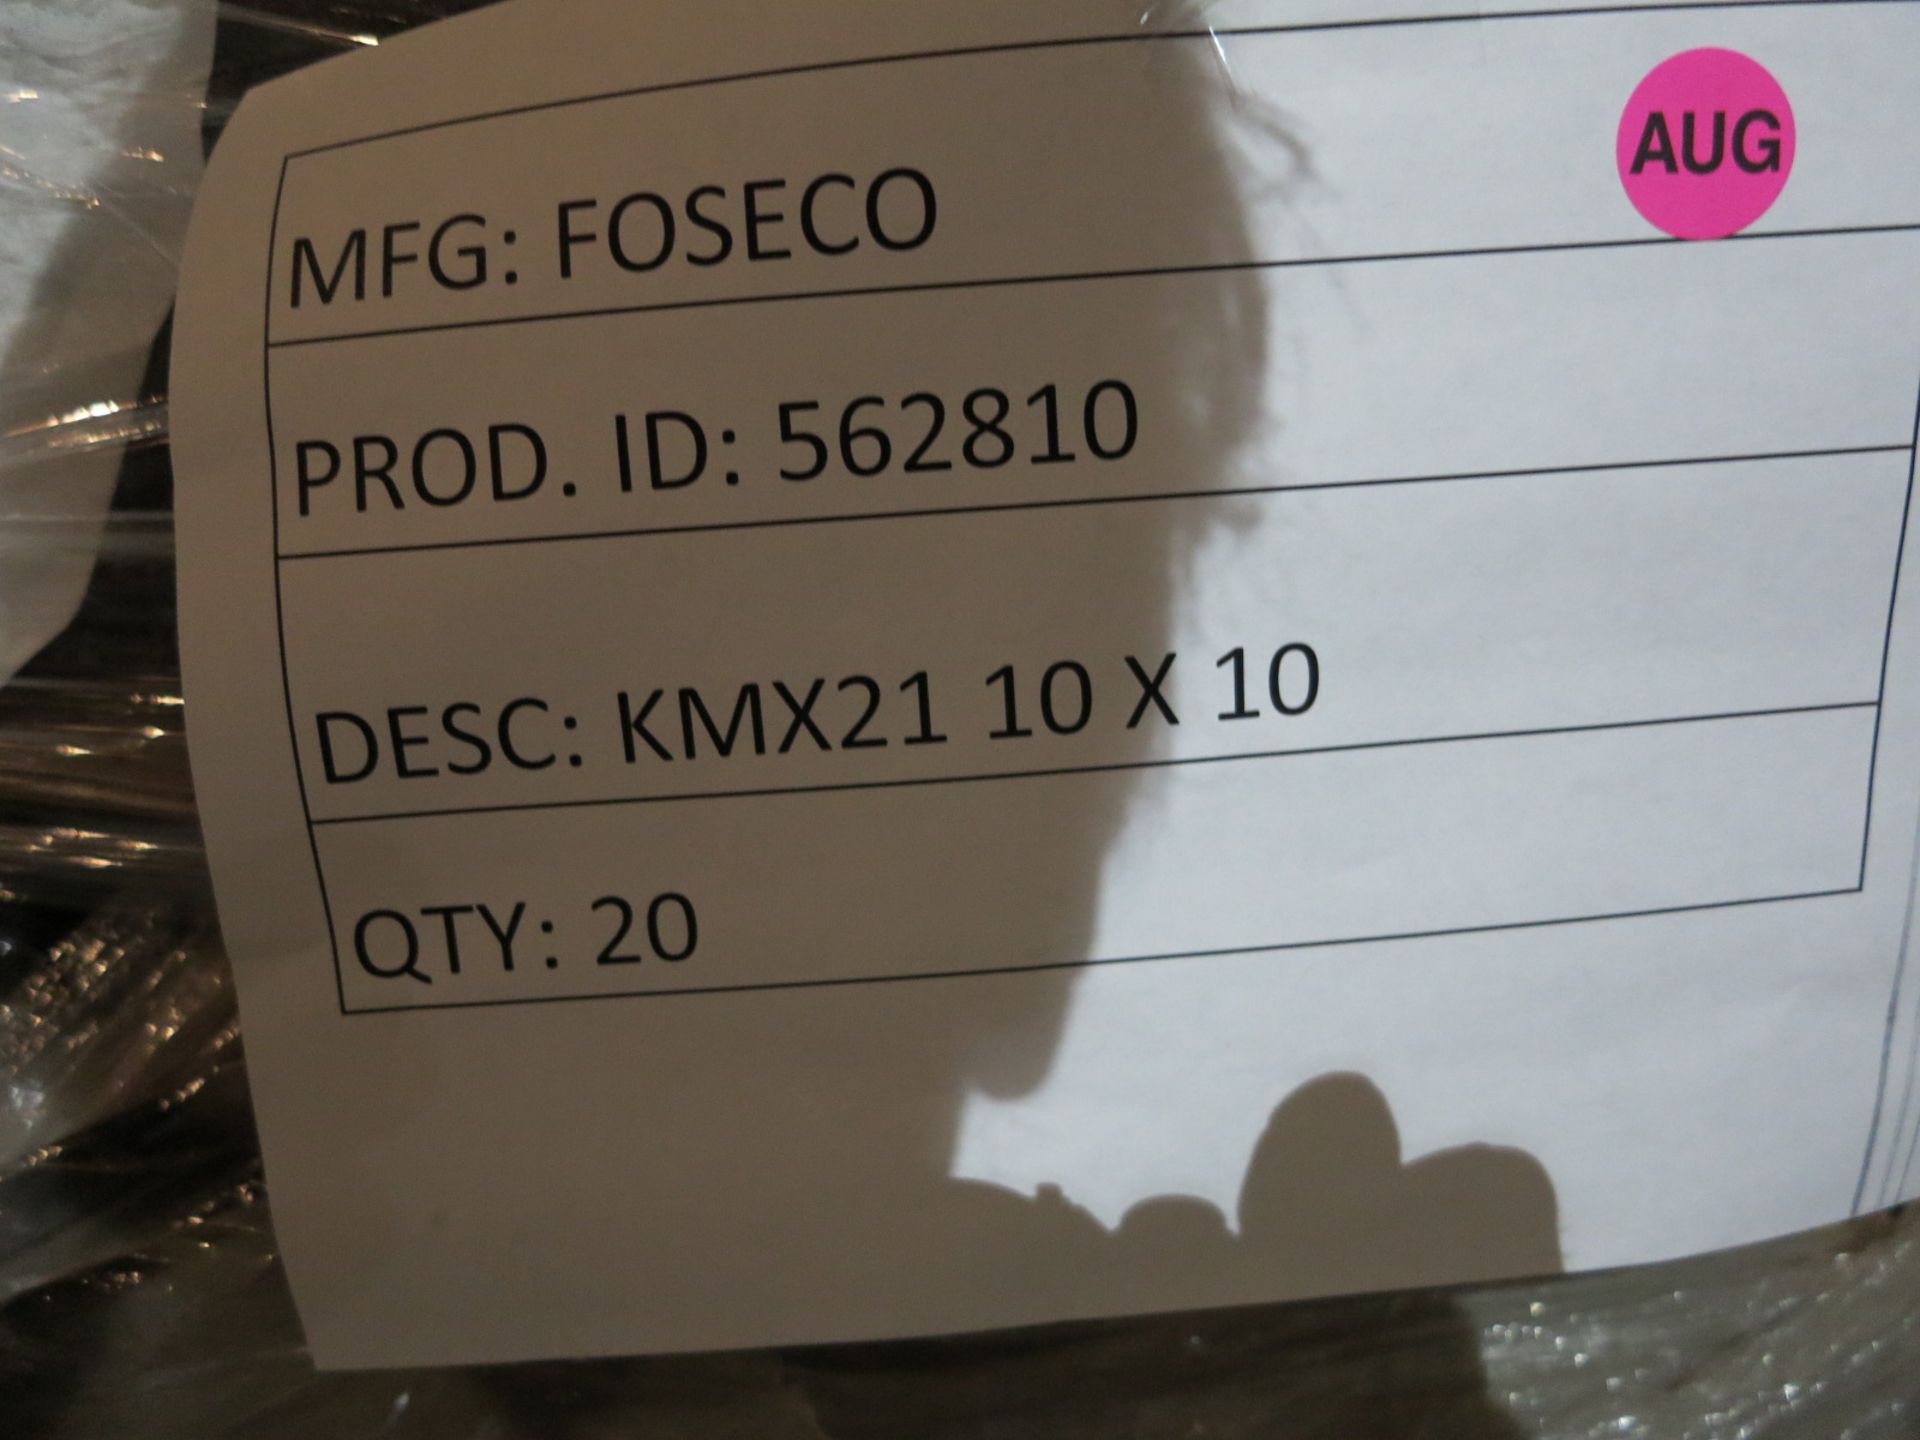 LOT - (6) PALLETS OF FOSECO EXOTHERMIC INSULATION SLEEVES AND AKRON PORCELAIN PRODUCTS, SEE PHOTOS